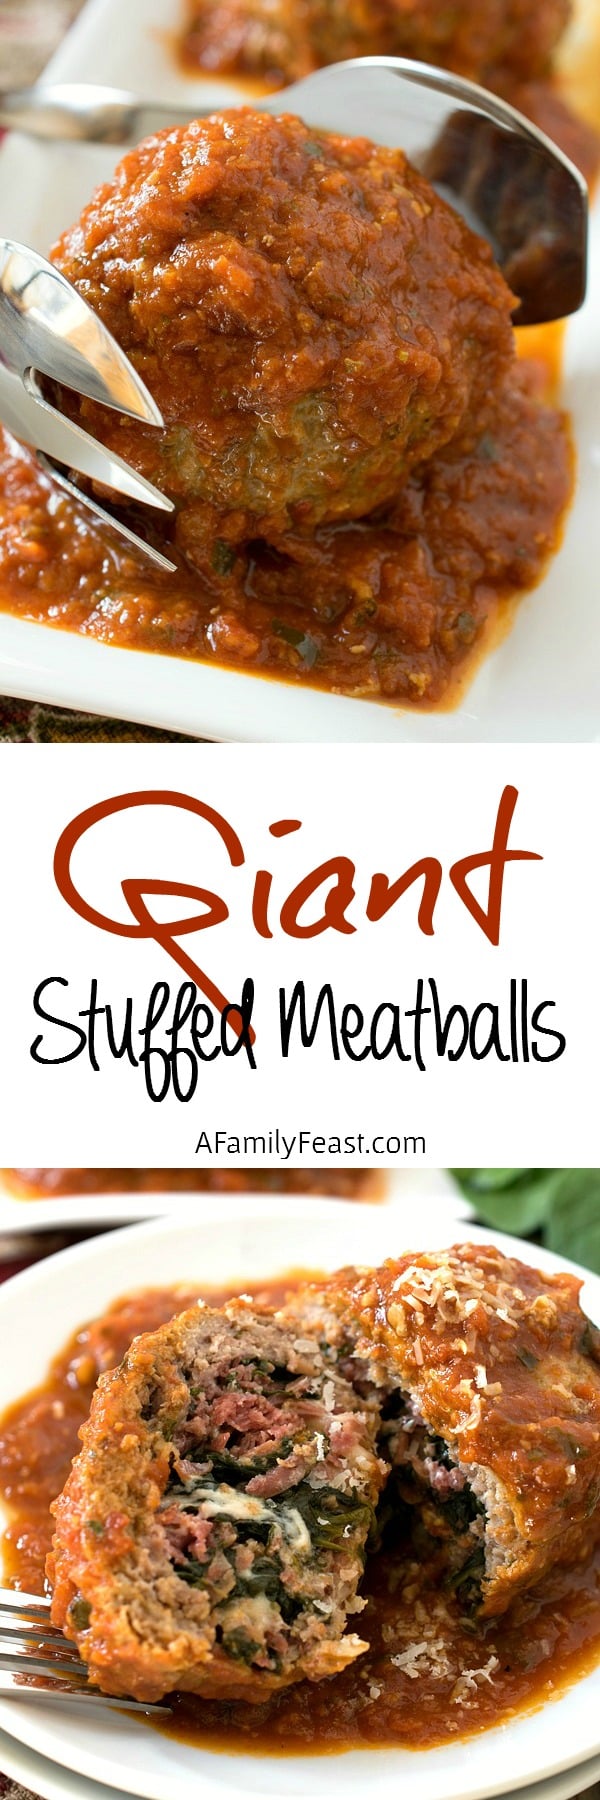 These fantastic Italian-style giant Stuffed Meatballs are delicious served as an appetizer or alongside your favorite pasta dish!